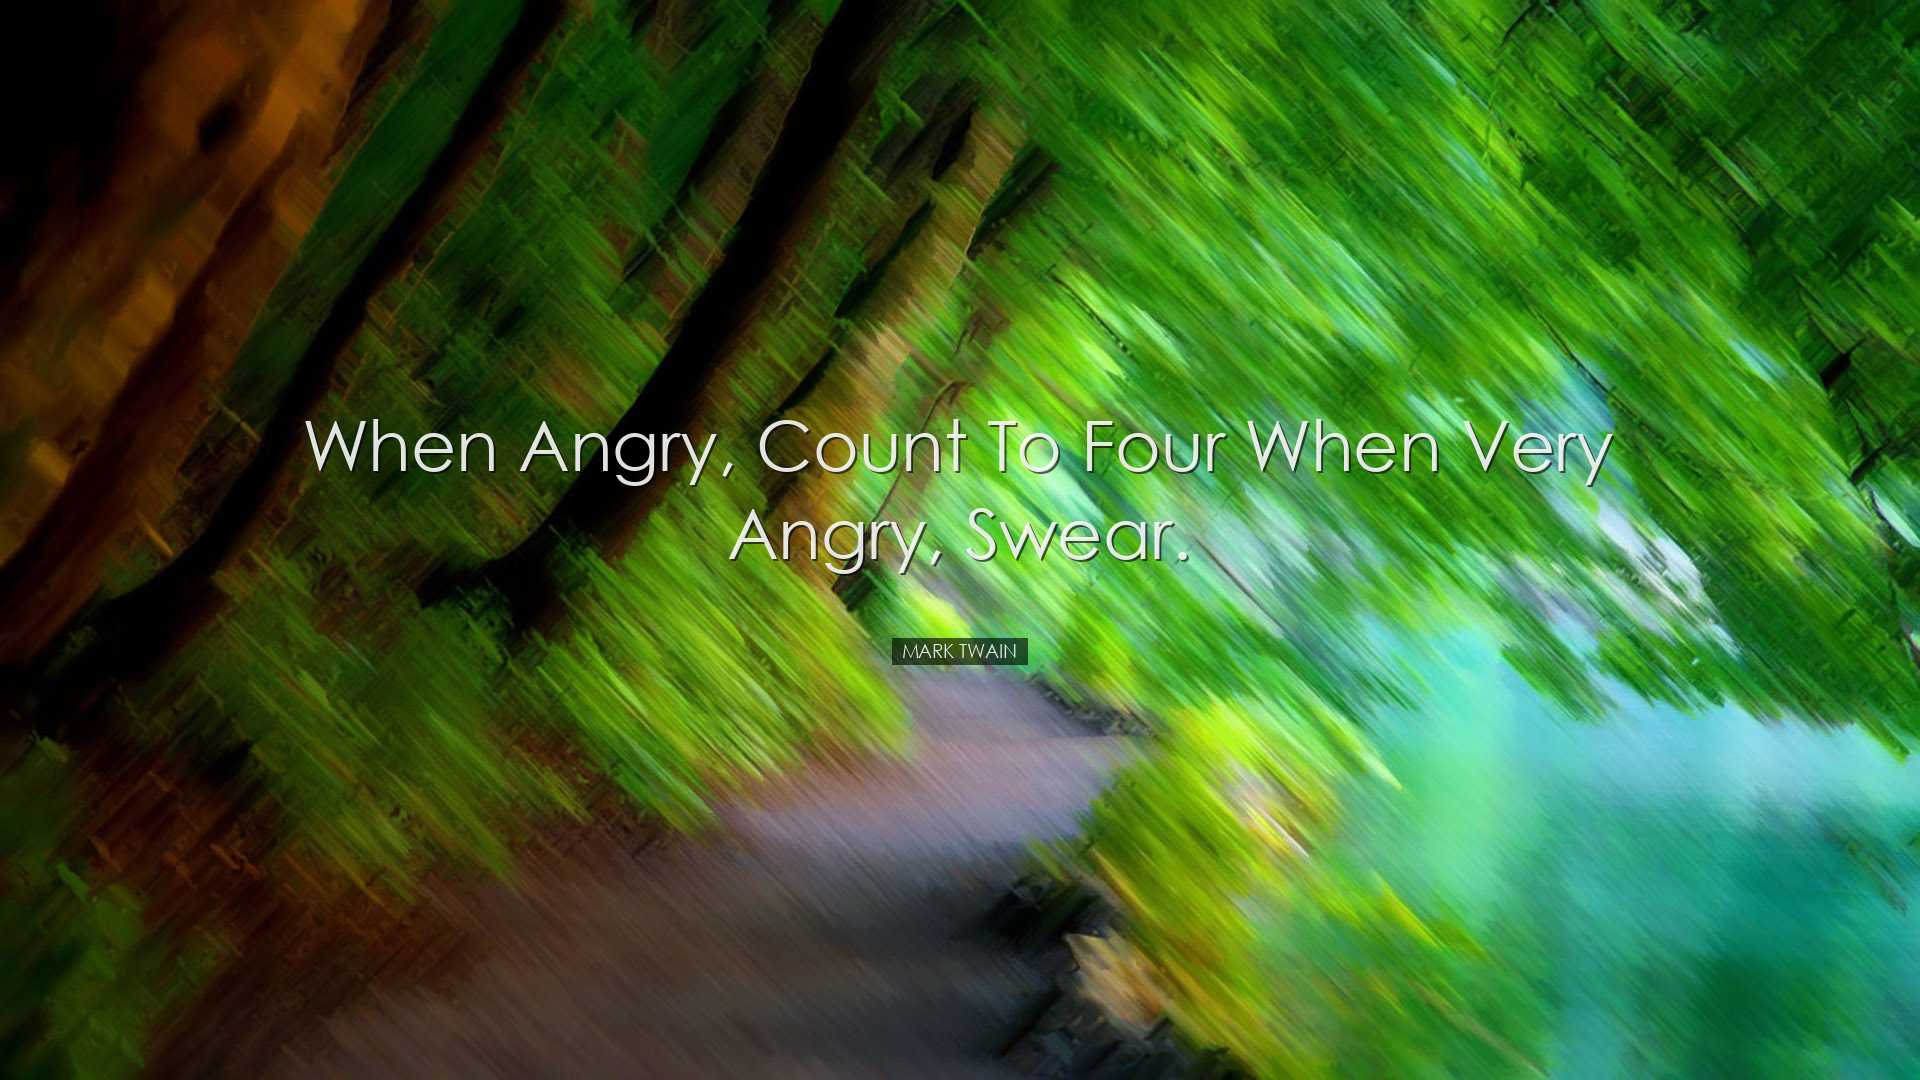 When angry, count to four when very angry, swear. - Mark Twain